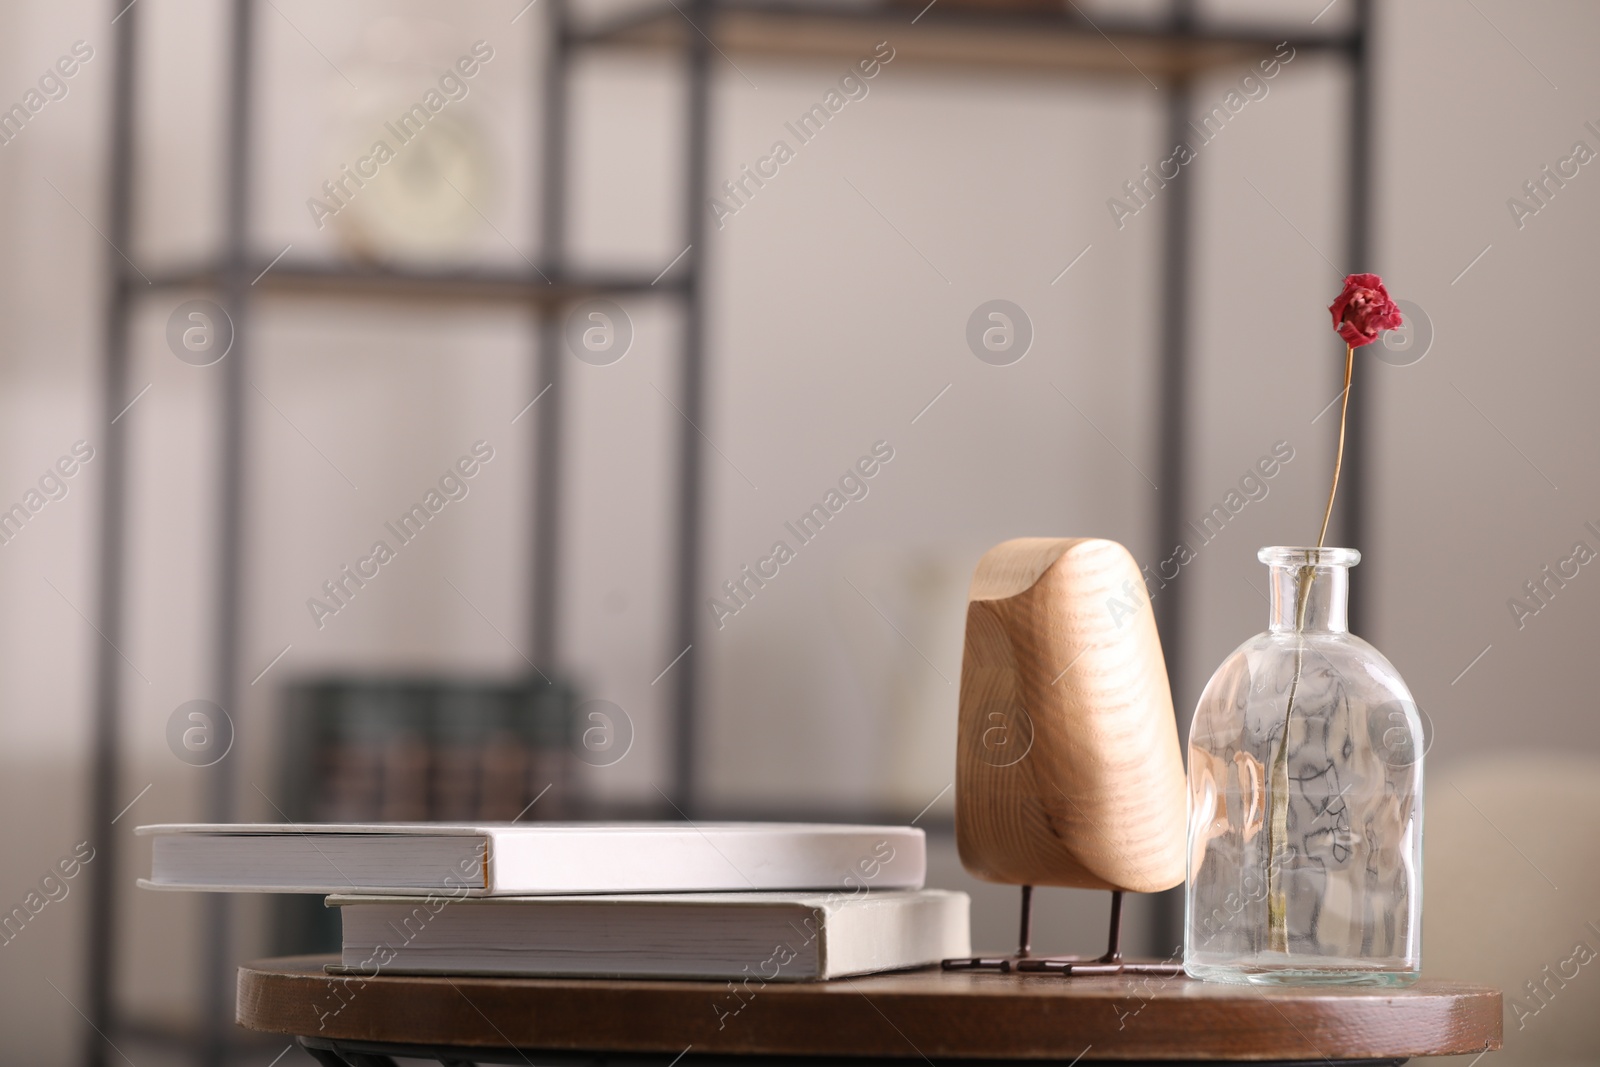 Photo of Vase with dried flower, books and wooden bird on table in room, space for text